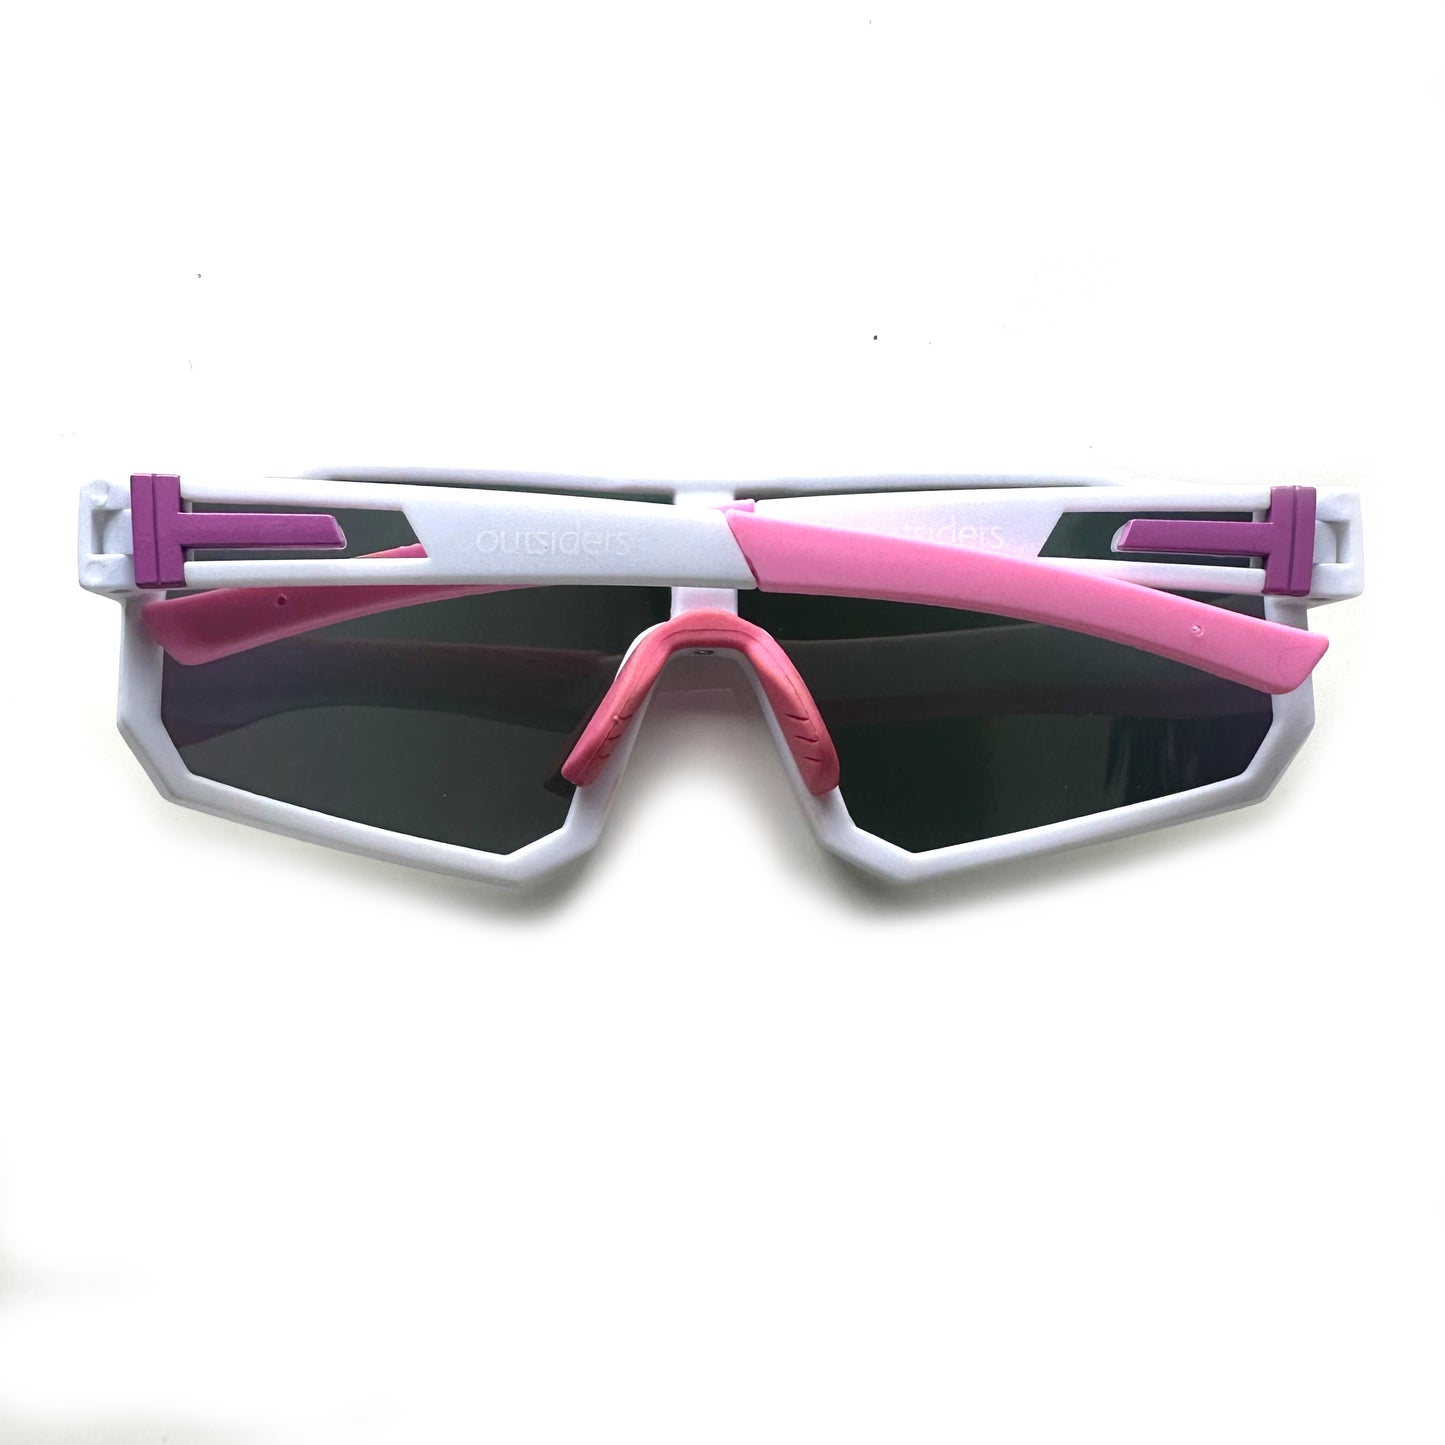 Outsiders Spaced Sunglasses - White Pink